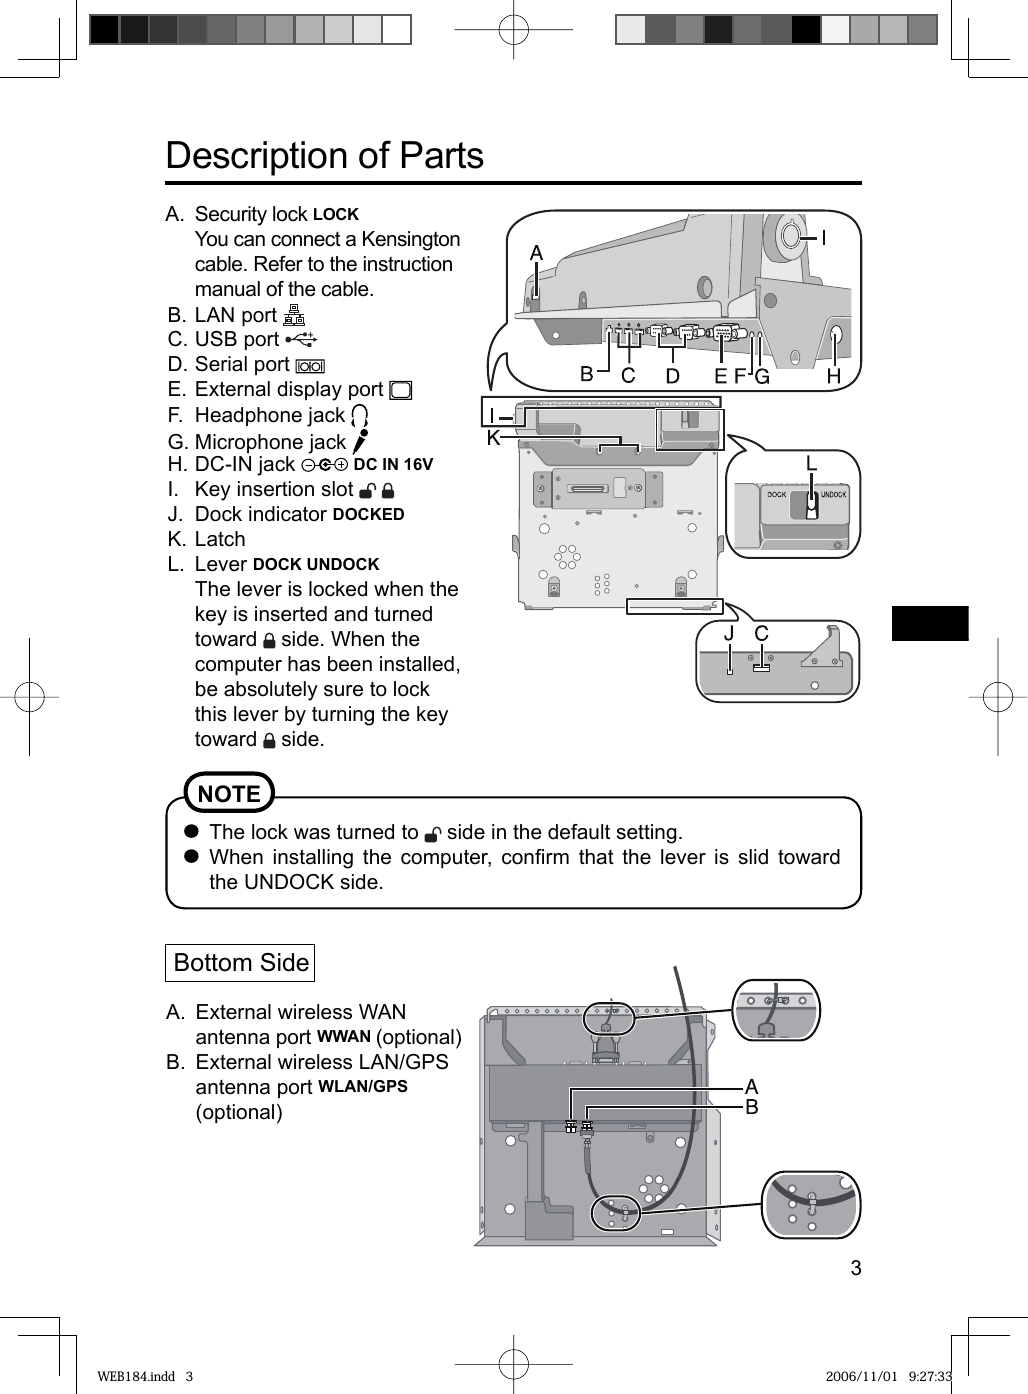 3Description of PartsA. Security lock LOCKYou can connect a Kensington cable. Refer to the instruction manual of the cable.B. LAN port C. USB port D. Serial port E. External display port F. Headphone jack G. Microphone jack H. DC-IN jack   DC IN 16VI.  Key insertion slot   J. Dock indicator DOCKEDK. LatchL. Lever DOCK UNDOCKThe lever is locked when the key is inserted and turned toward   side. When the computer has been installed, be absolutely sure to lock this lever by turning the key toward   side.NOTE The lock was turned to   side in the default setting. When installing the computer, conﬁ rm that the lever is slid toward the UNDOCK side.Bottom SideA.  External wireless WAN antenna port WWAN (optional)B.  External wireless LAN/GPS antenna port WLAN/GPS (optional)WEB184.indd   3WEB184.indd   3 2006/11/01   9:27:332006/11/01   9:27:33